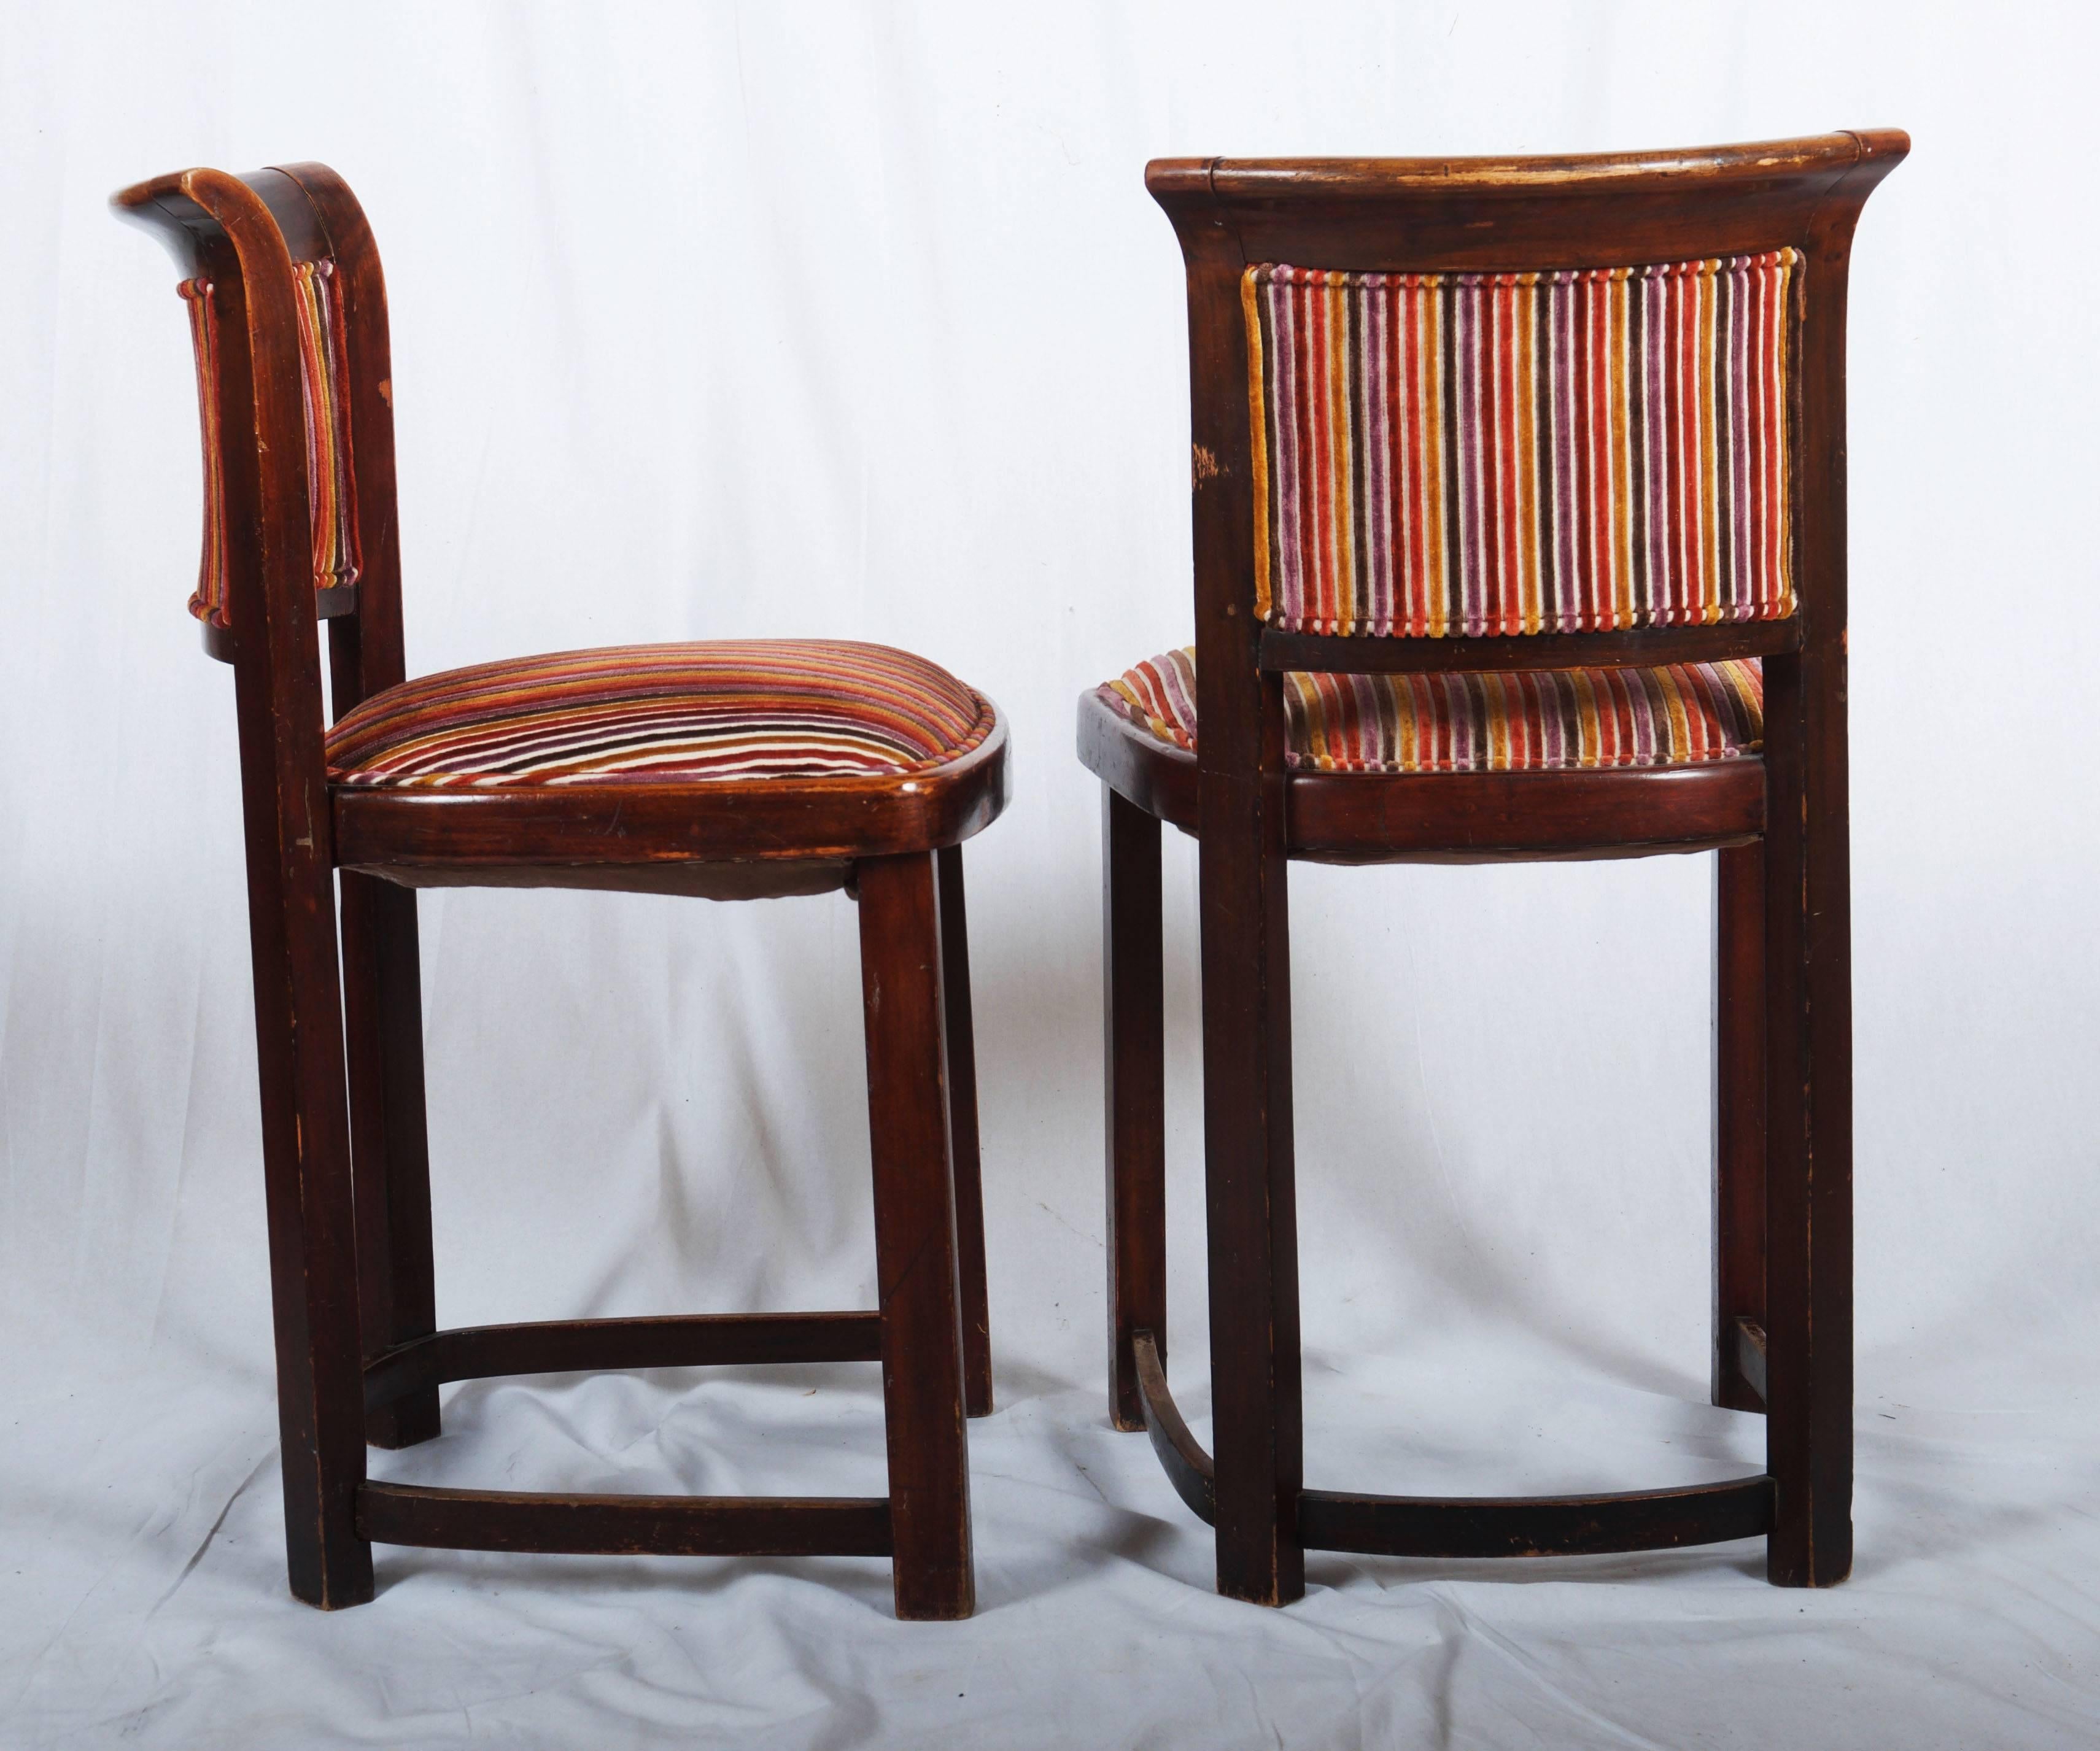 Beech bentwood with upholstered seat and backrest. Catalog number 798.
Designed probably by Josef Hoffmann for Thonet, circa 1900.
Set of two.